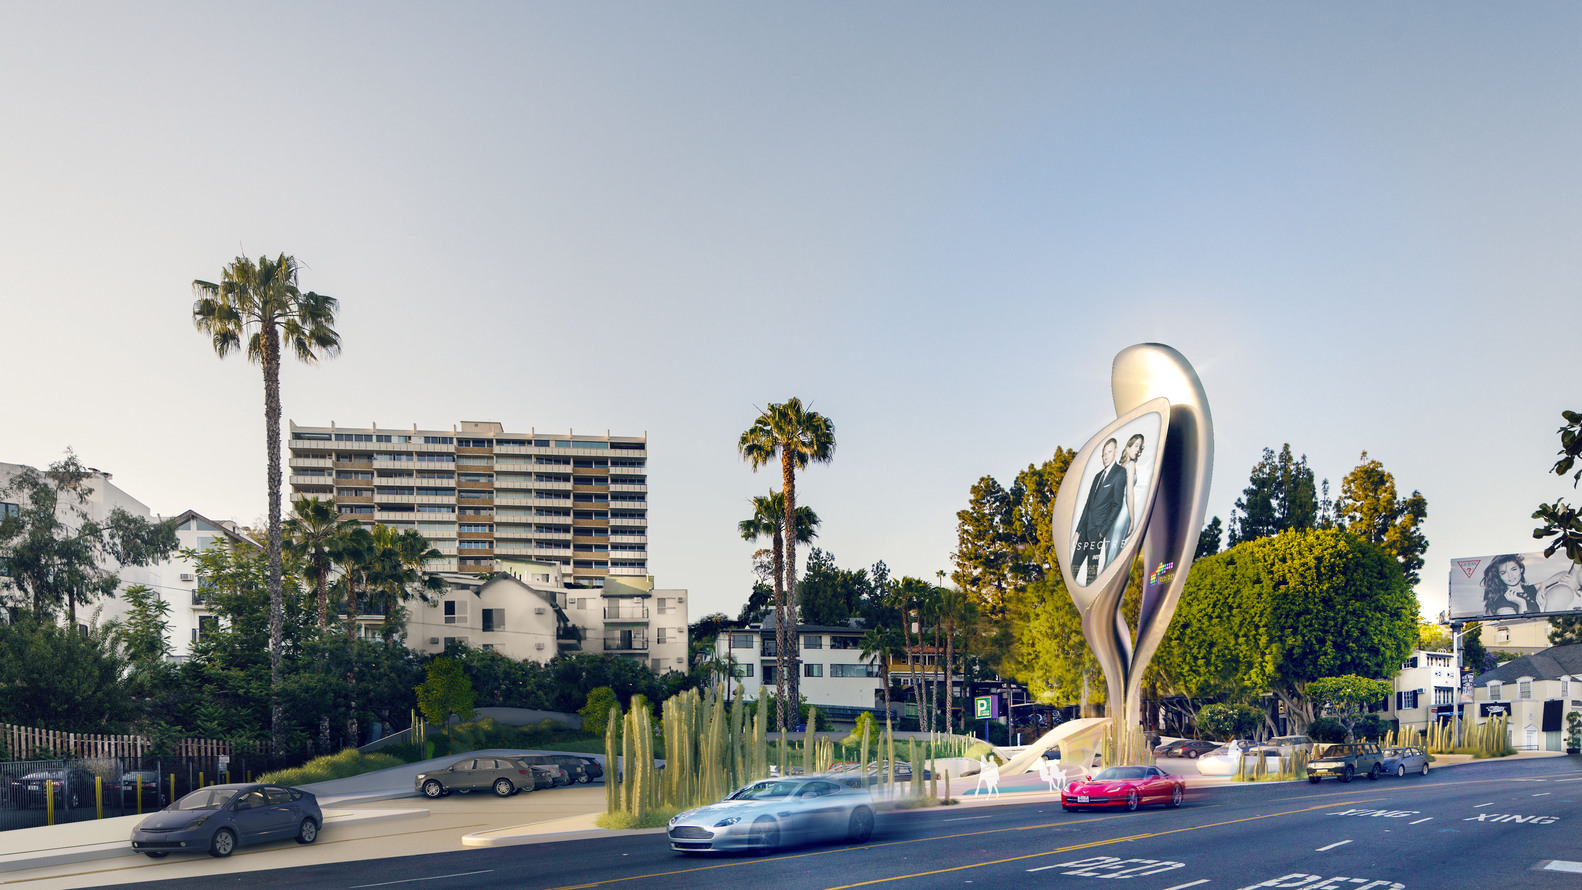 JCDecaux + Zaha Hadid Design – The Prism / Source: City of West Hollywood 